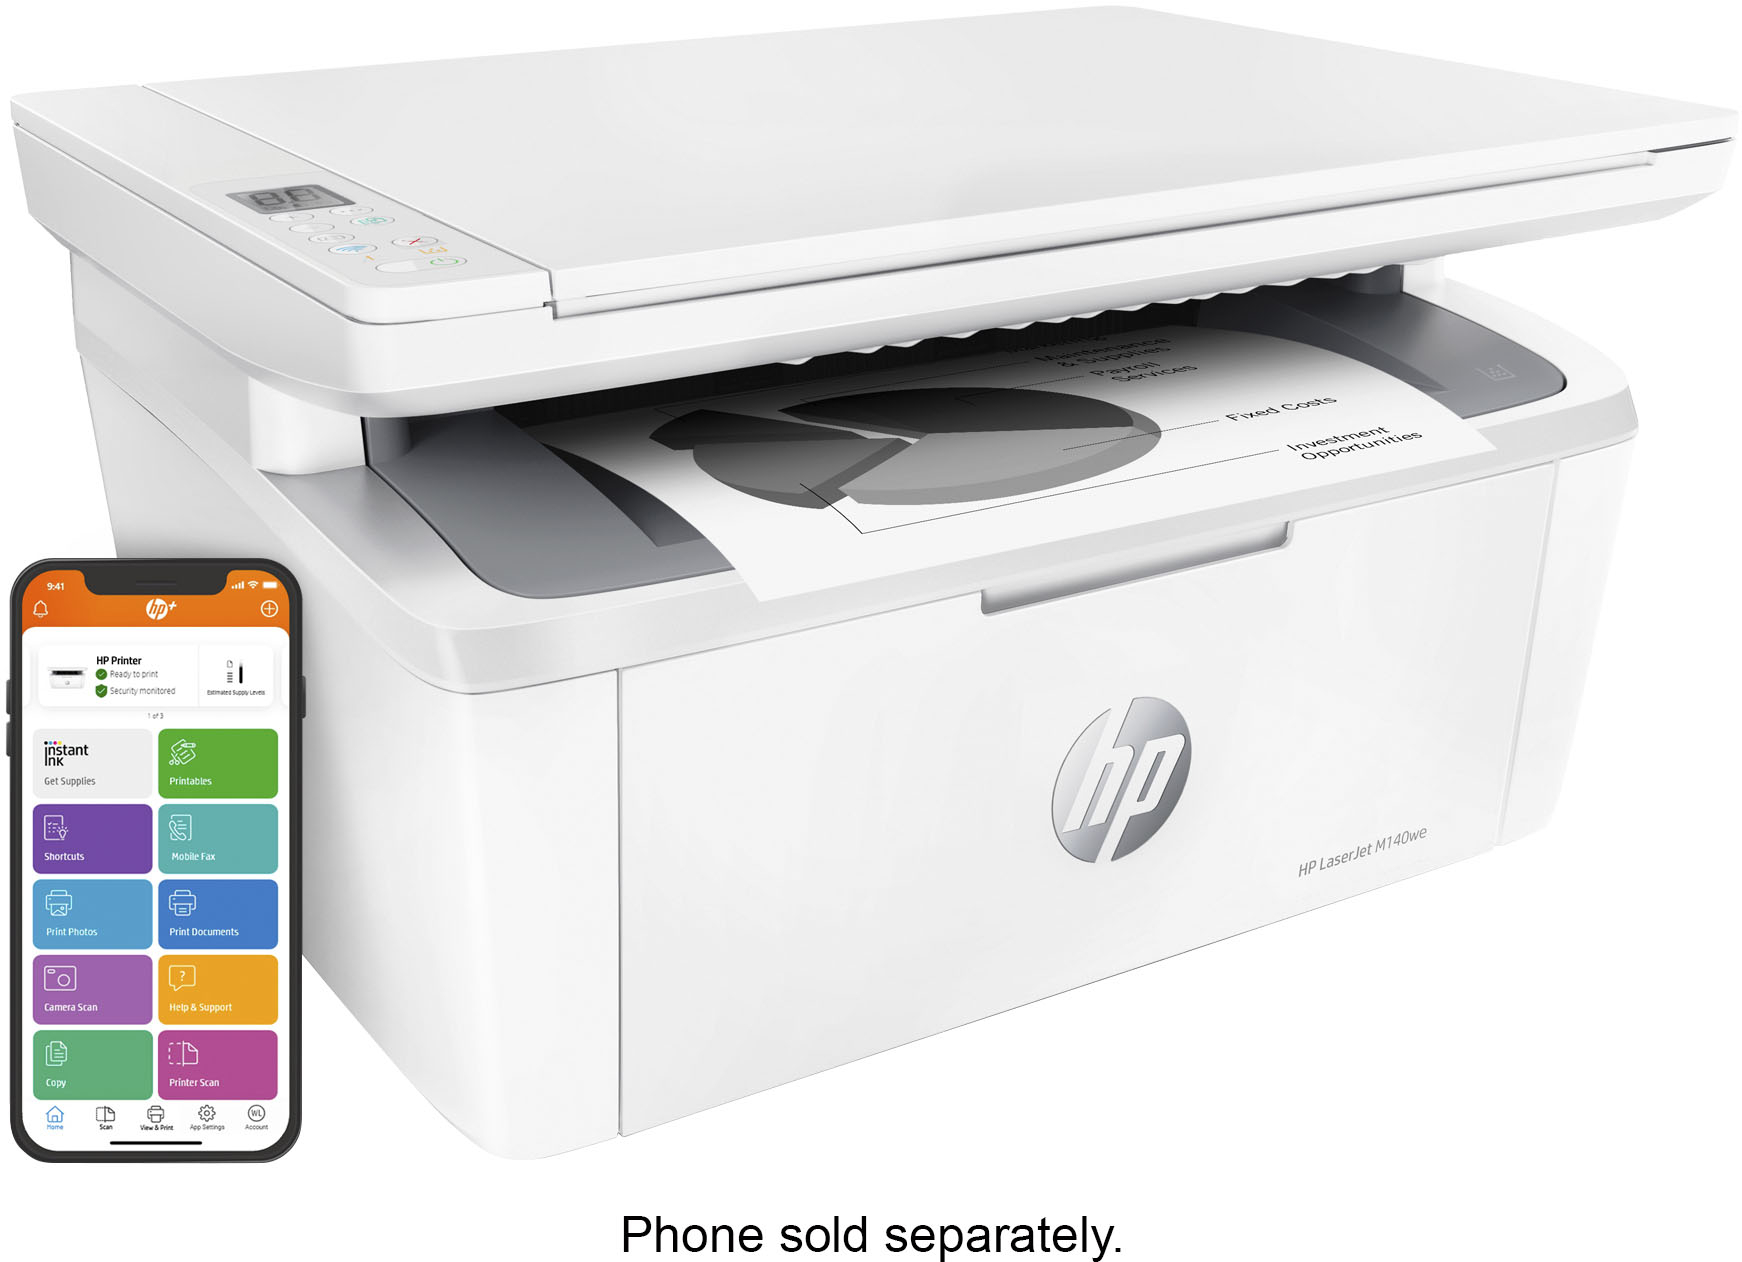 HP Best with M140we HP+ LaserJet Black and Laser M140we 6 with LaserJet - Wireless months Instant Buy included White of White Printer Ink